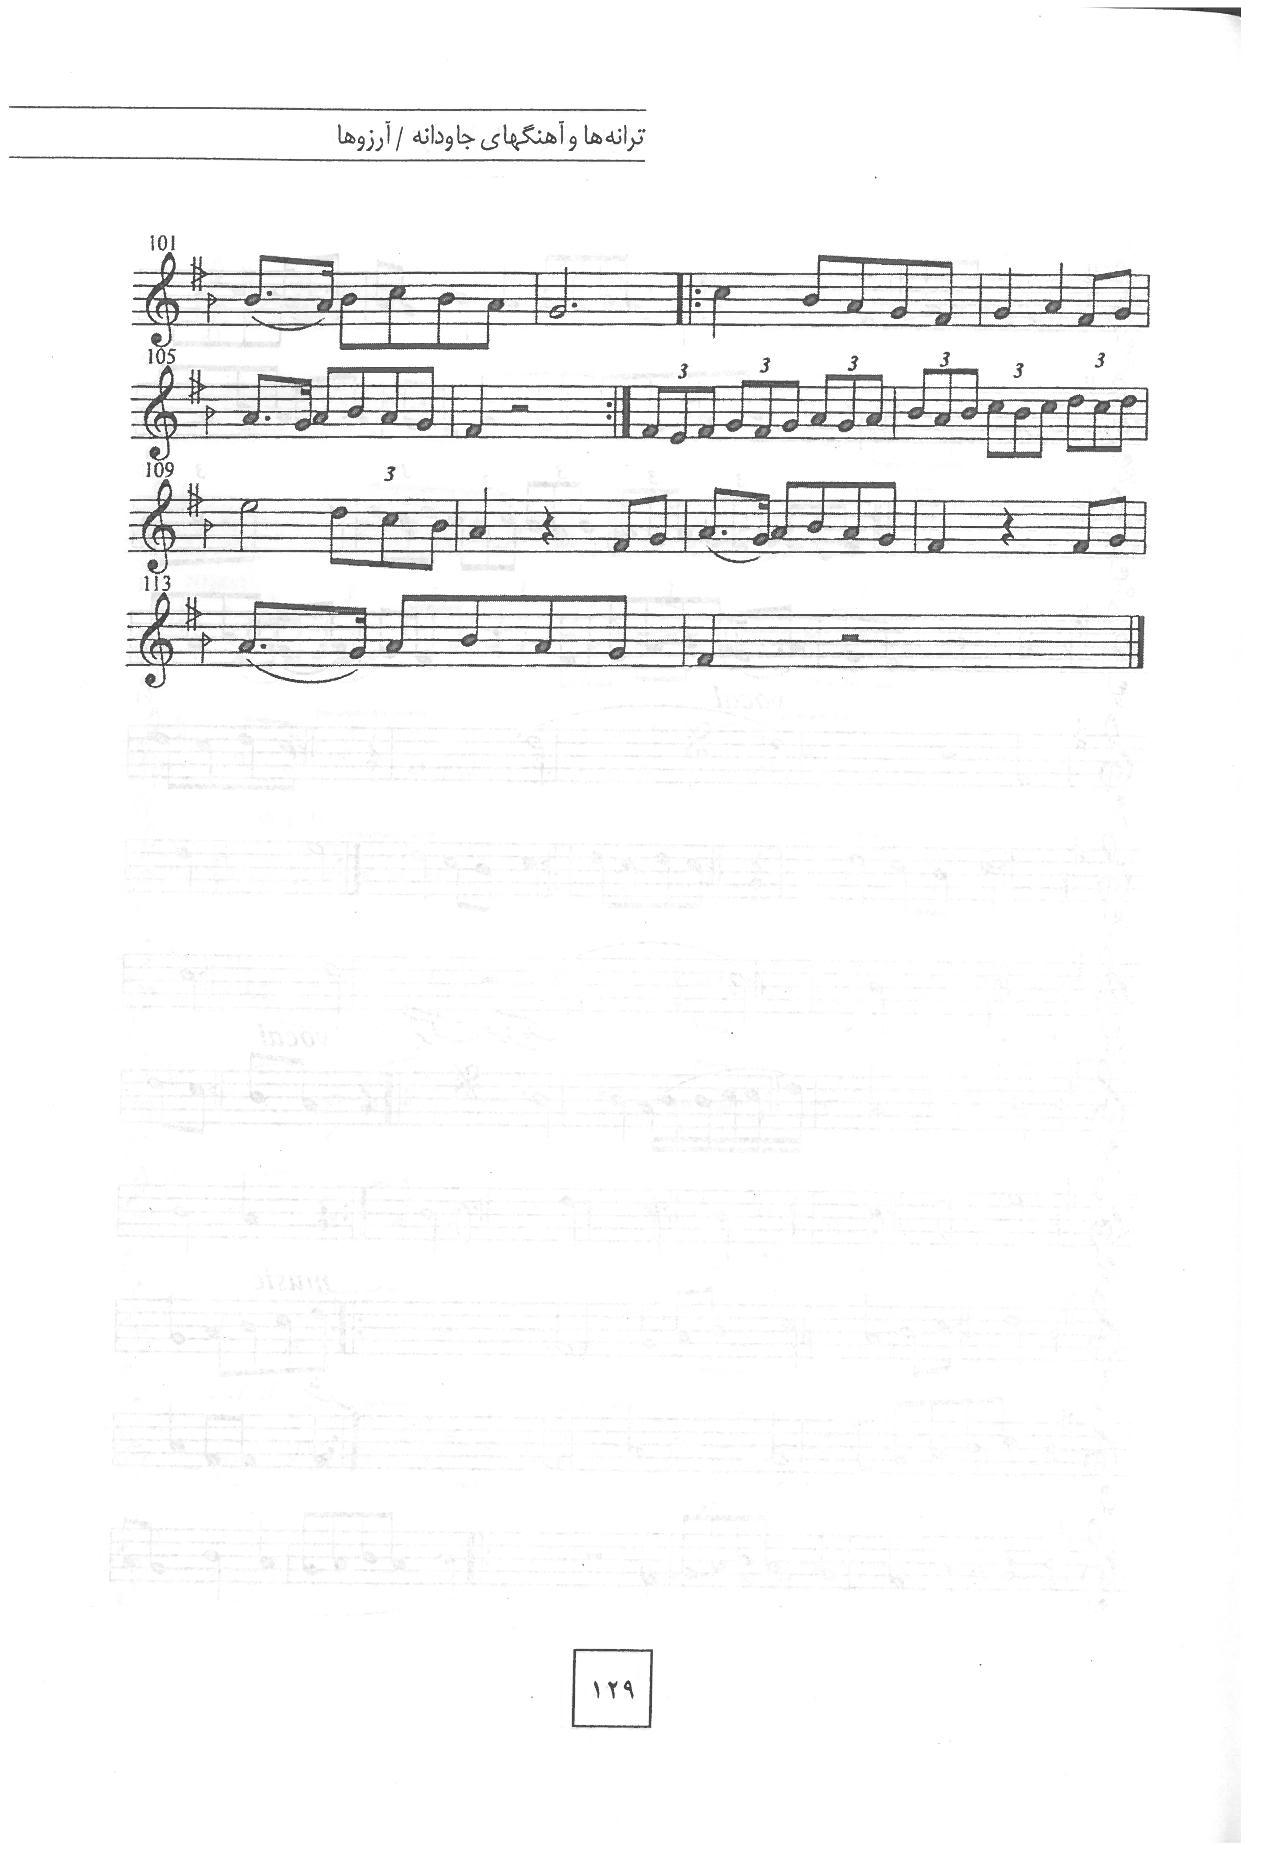 A sheet music page with several lines of musical notes.